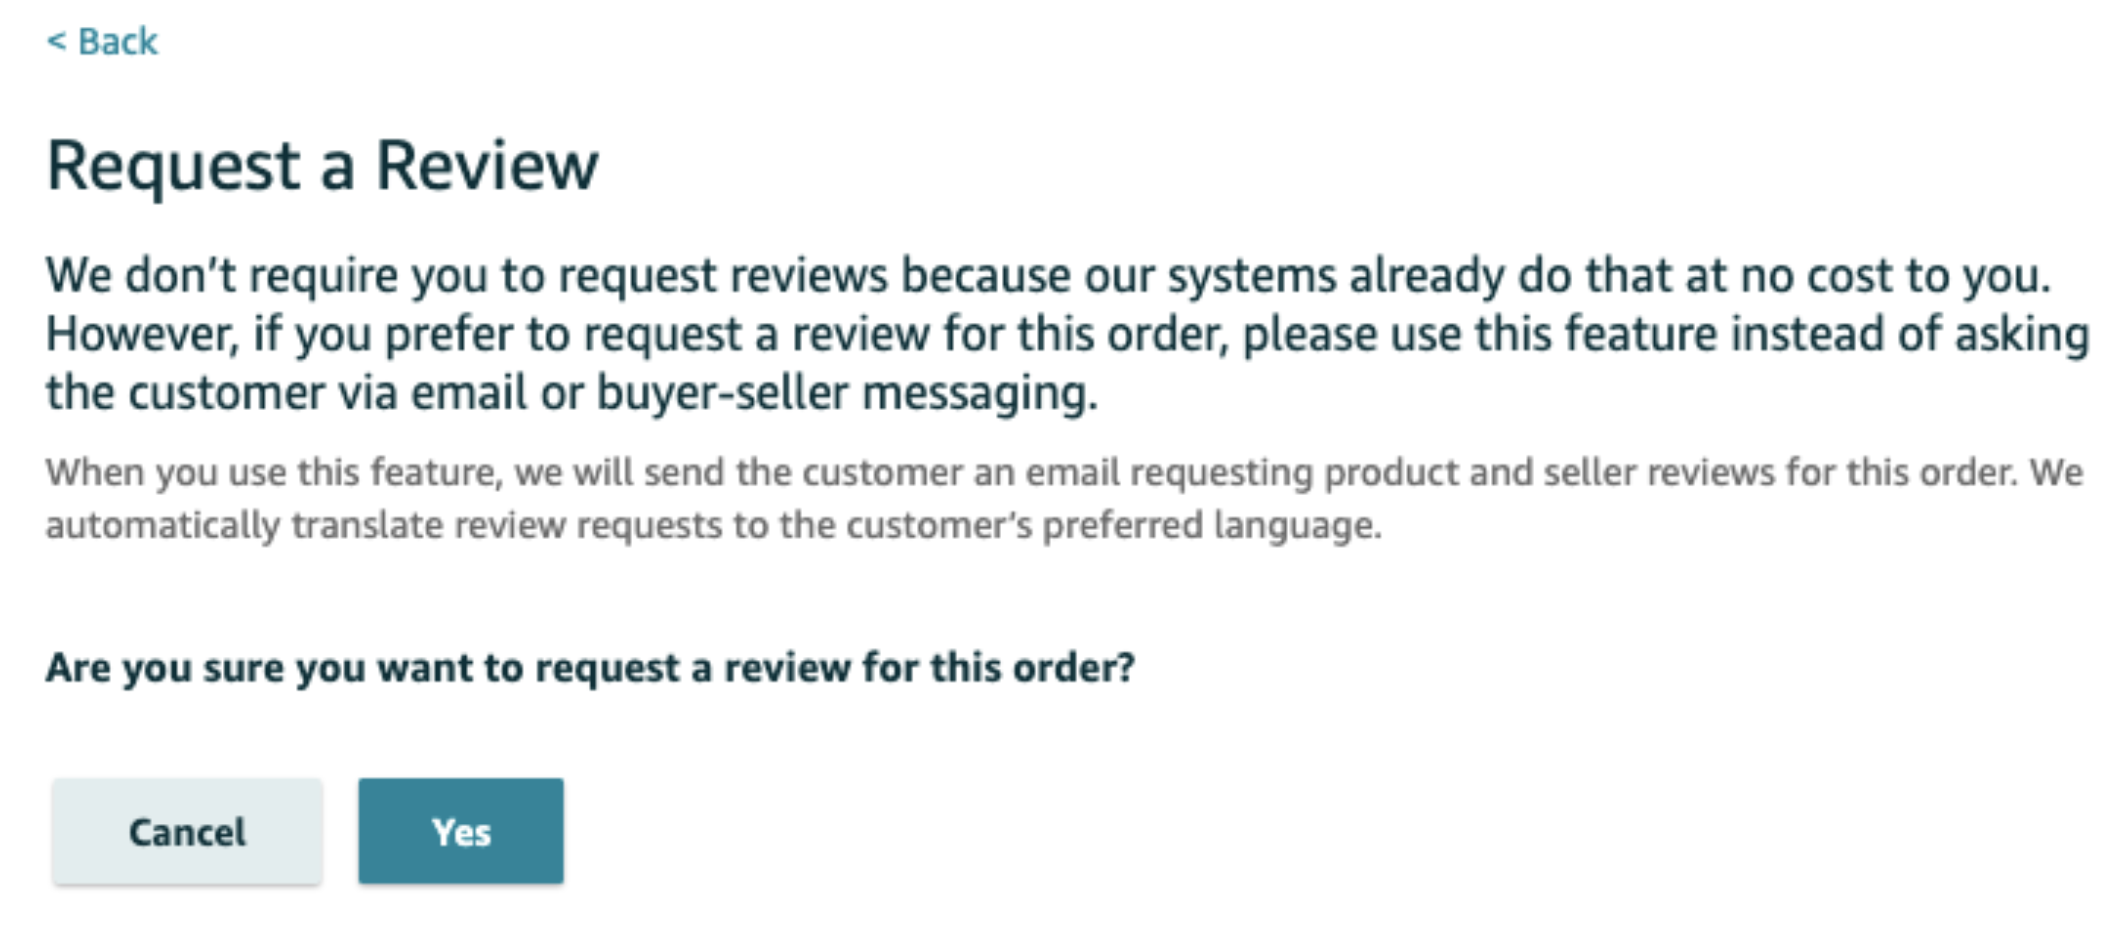 How to Request a Review on Amazon